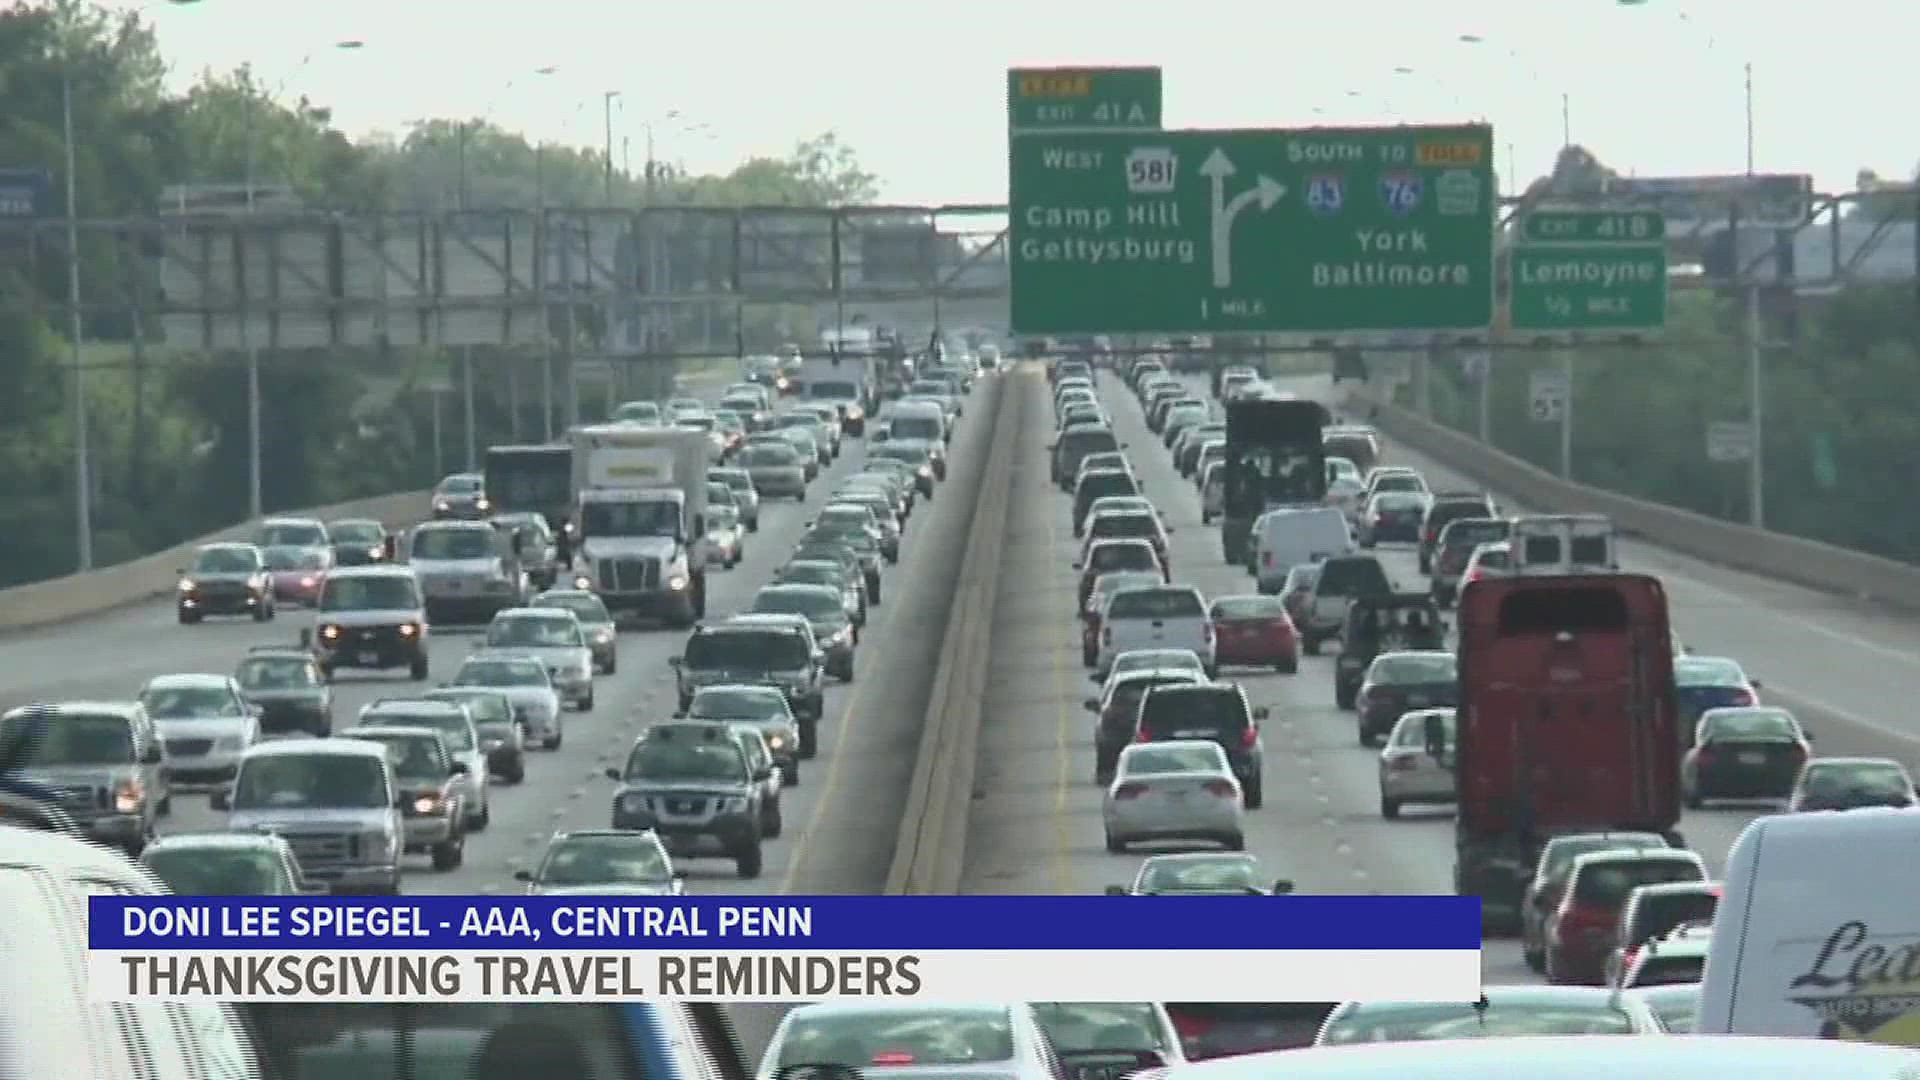 Thousands of people will hit the roads this weekend to celebrate the holiday.